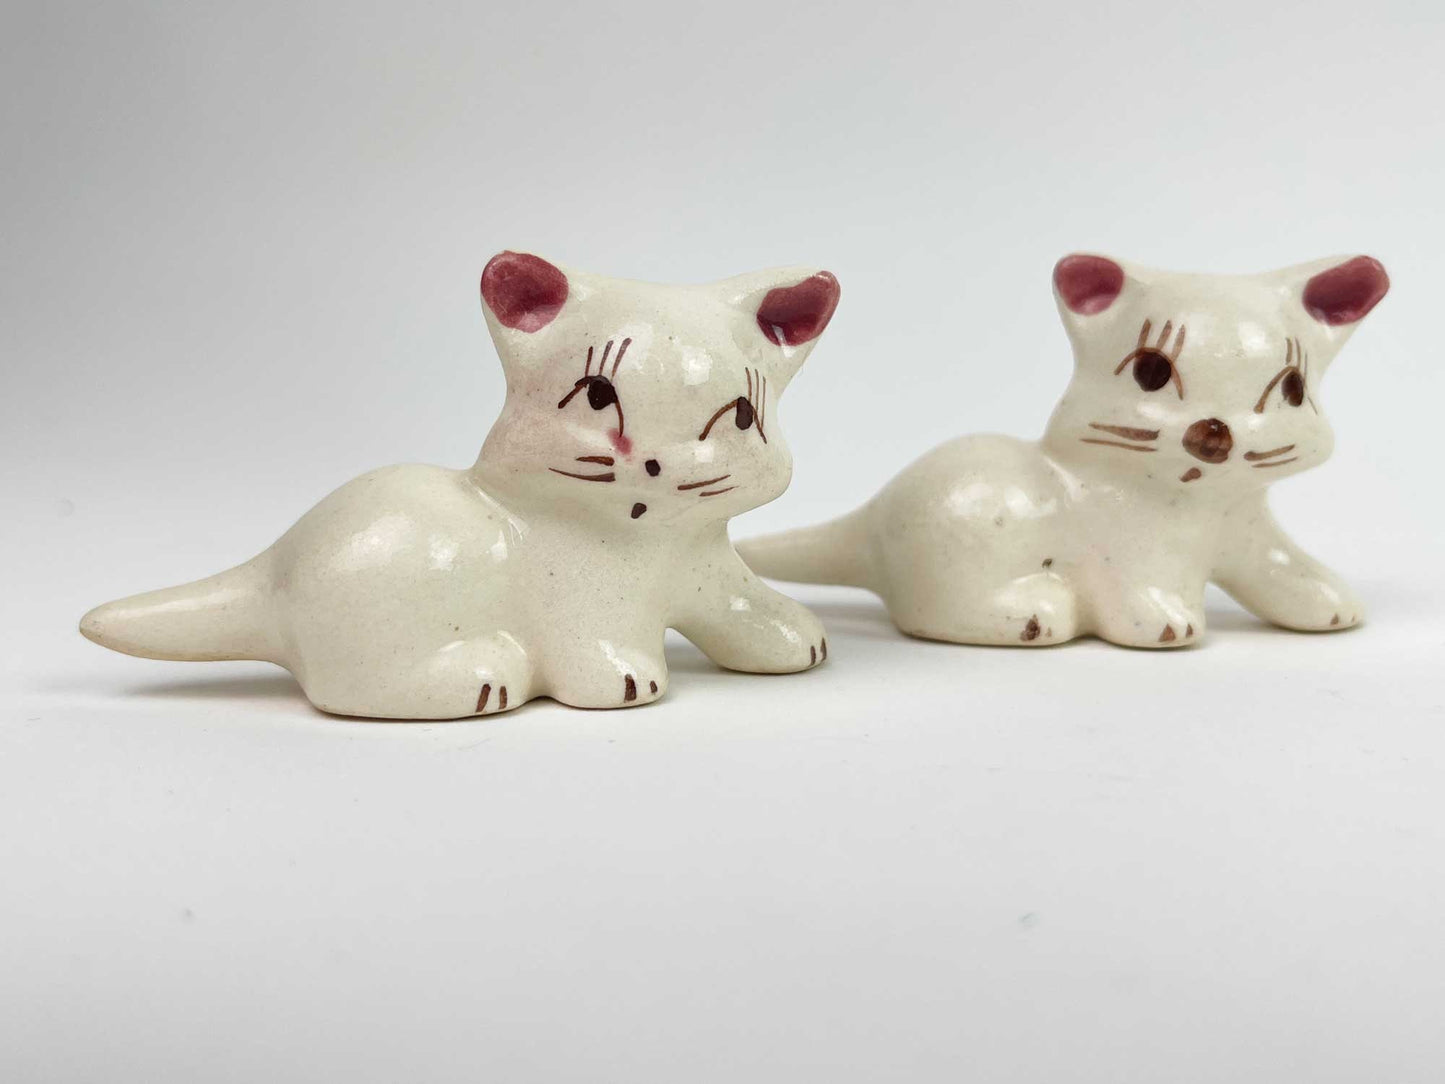 Vintage Kitten Figurines | Set of 2 |  Hand Painted Glazed Ceramic | Mid Century | Collectable